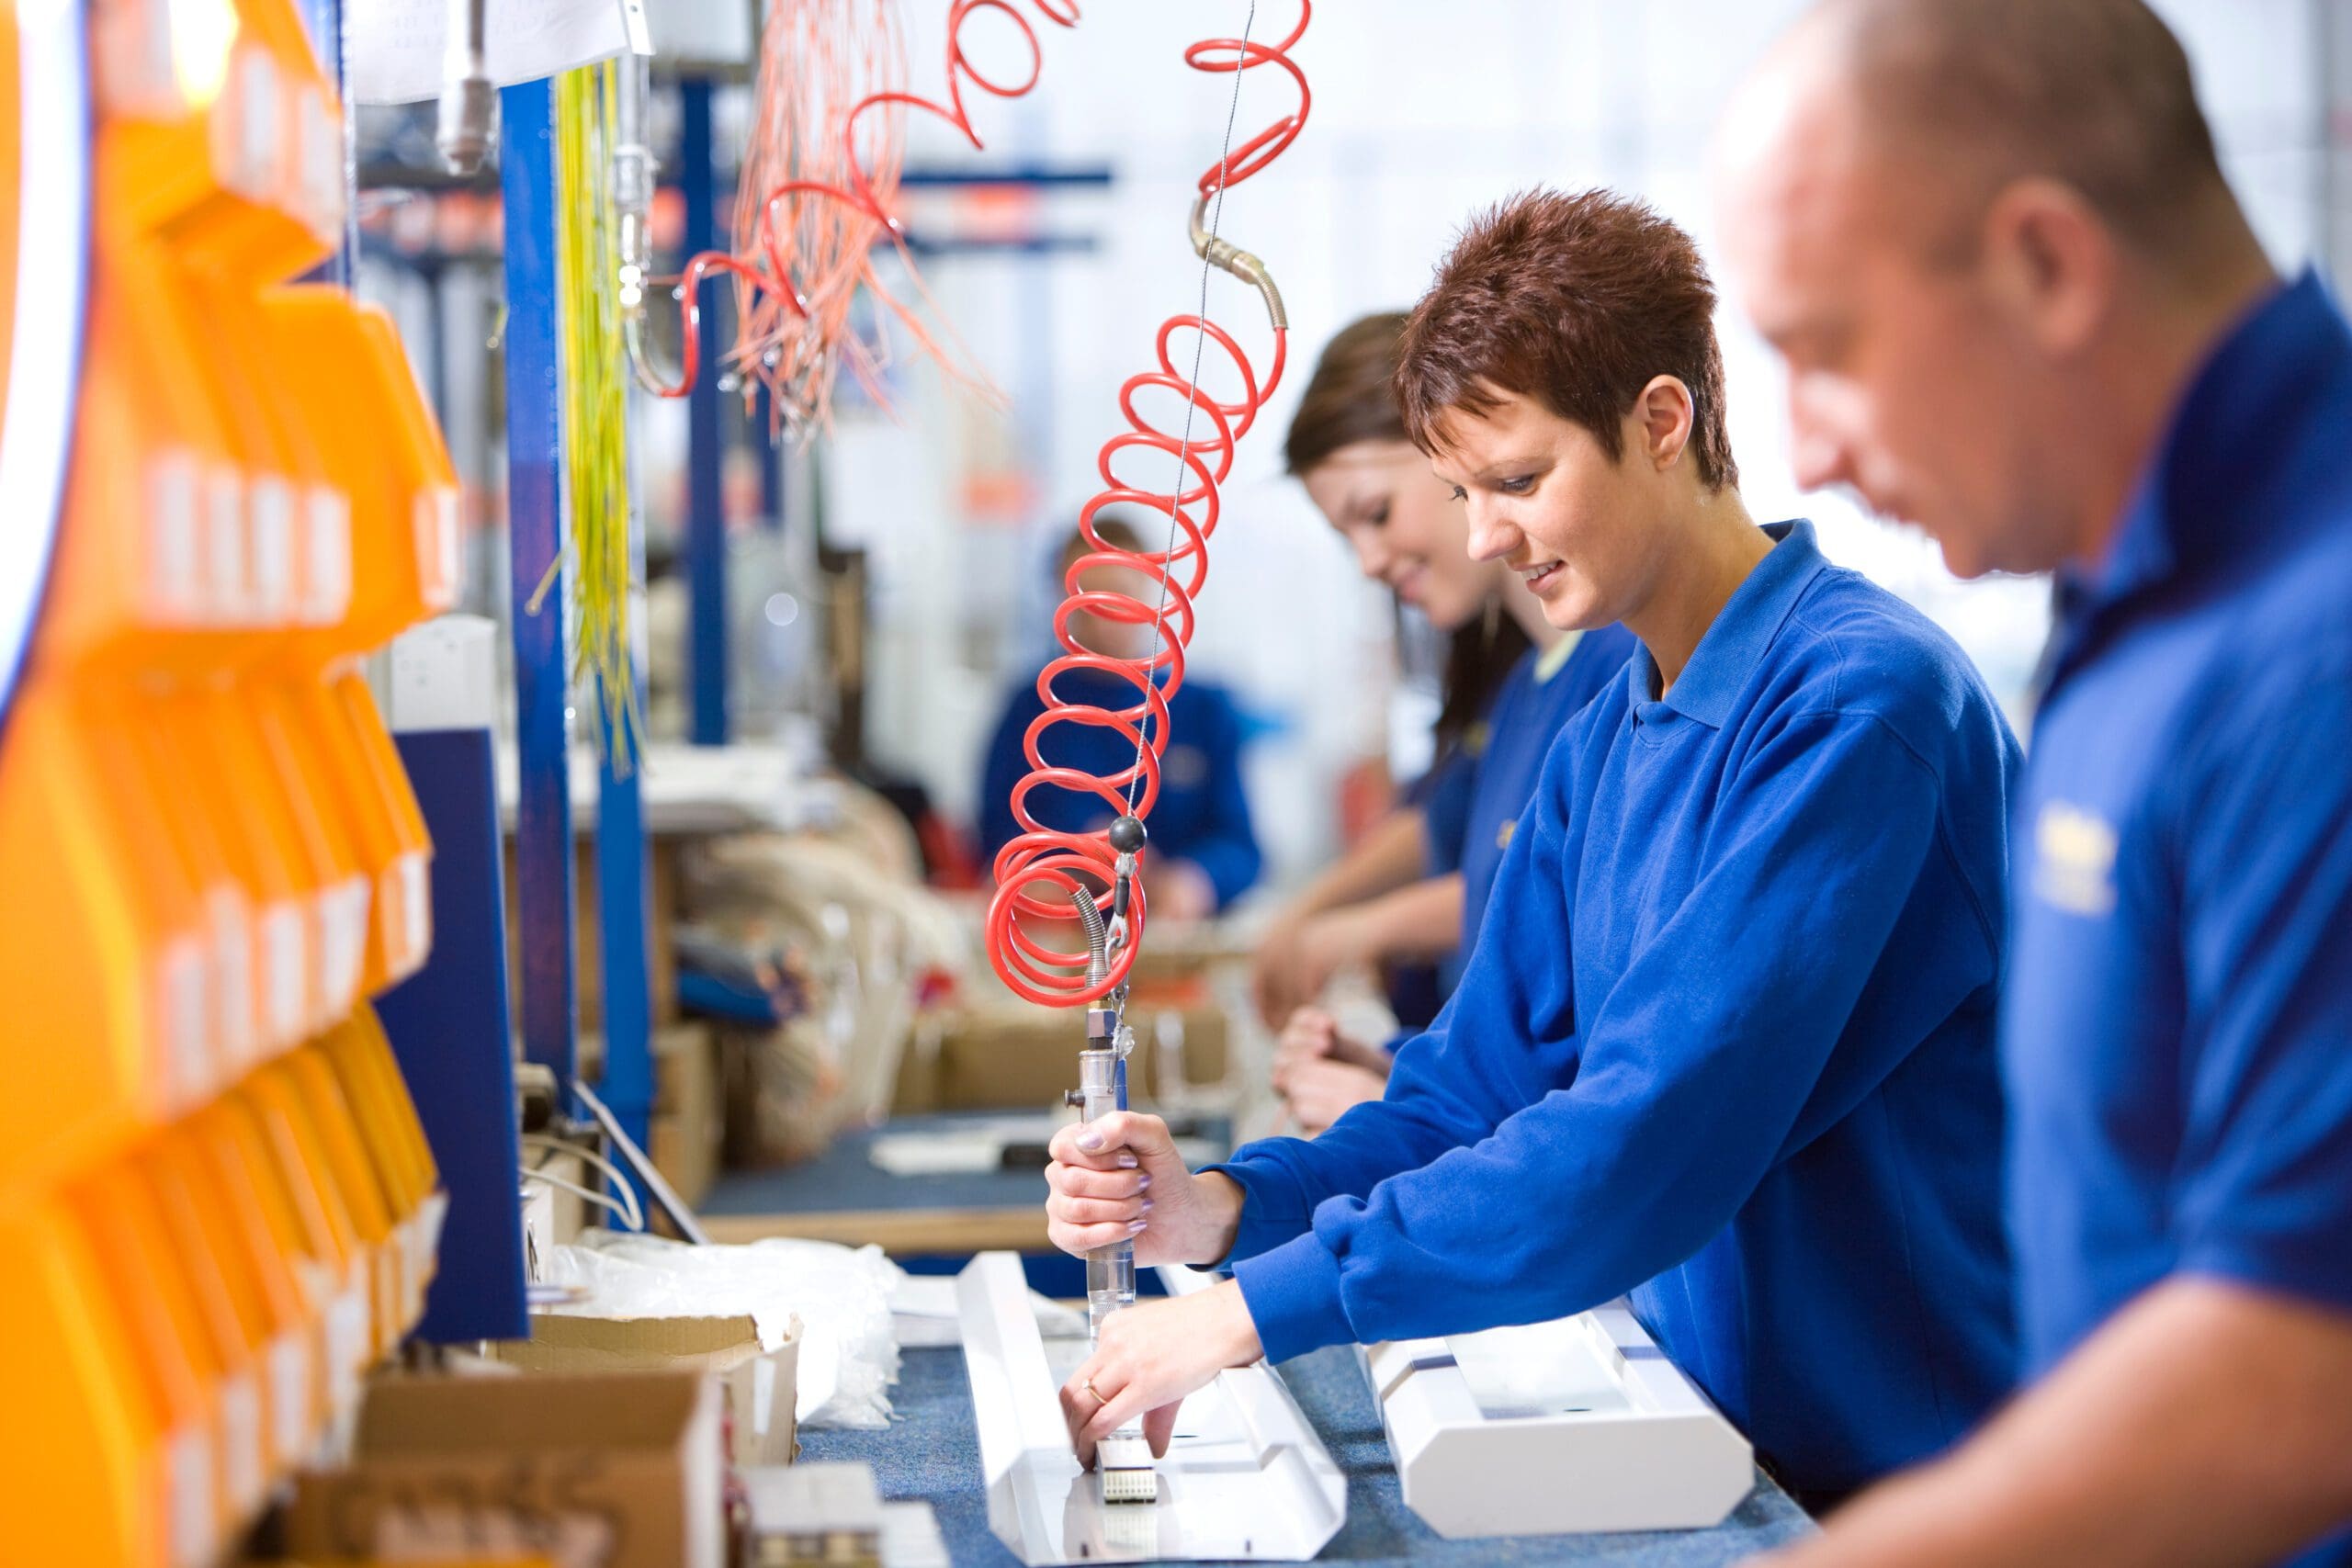 people working in a factory setting